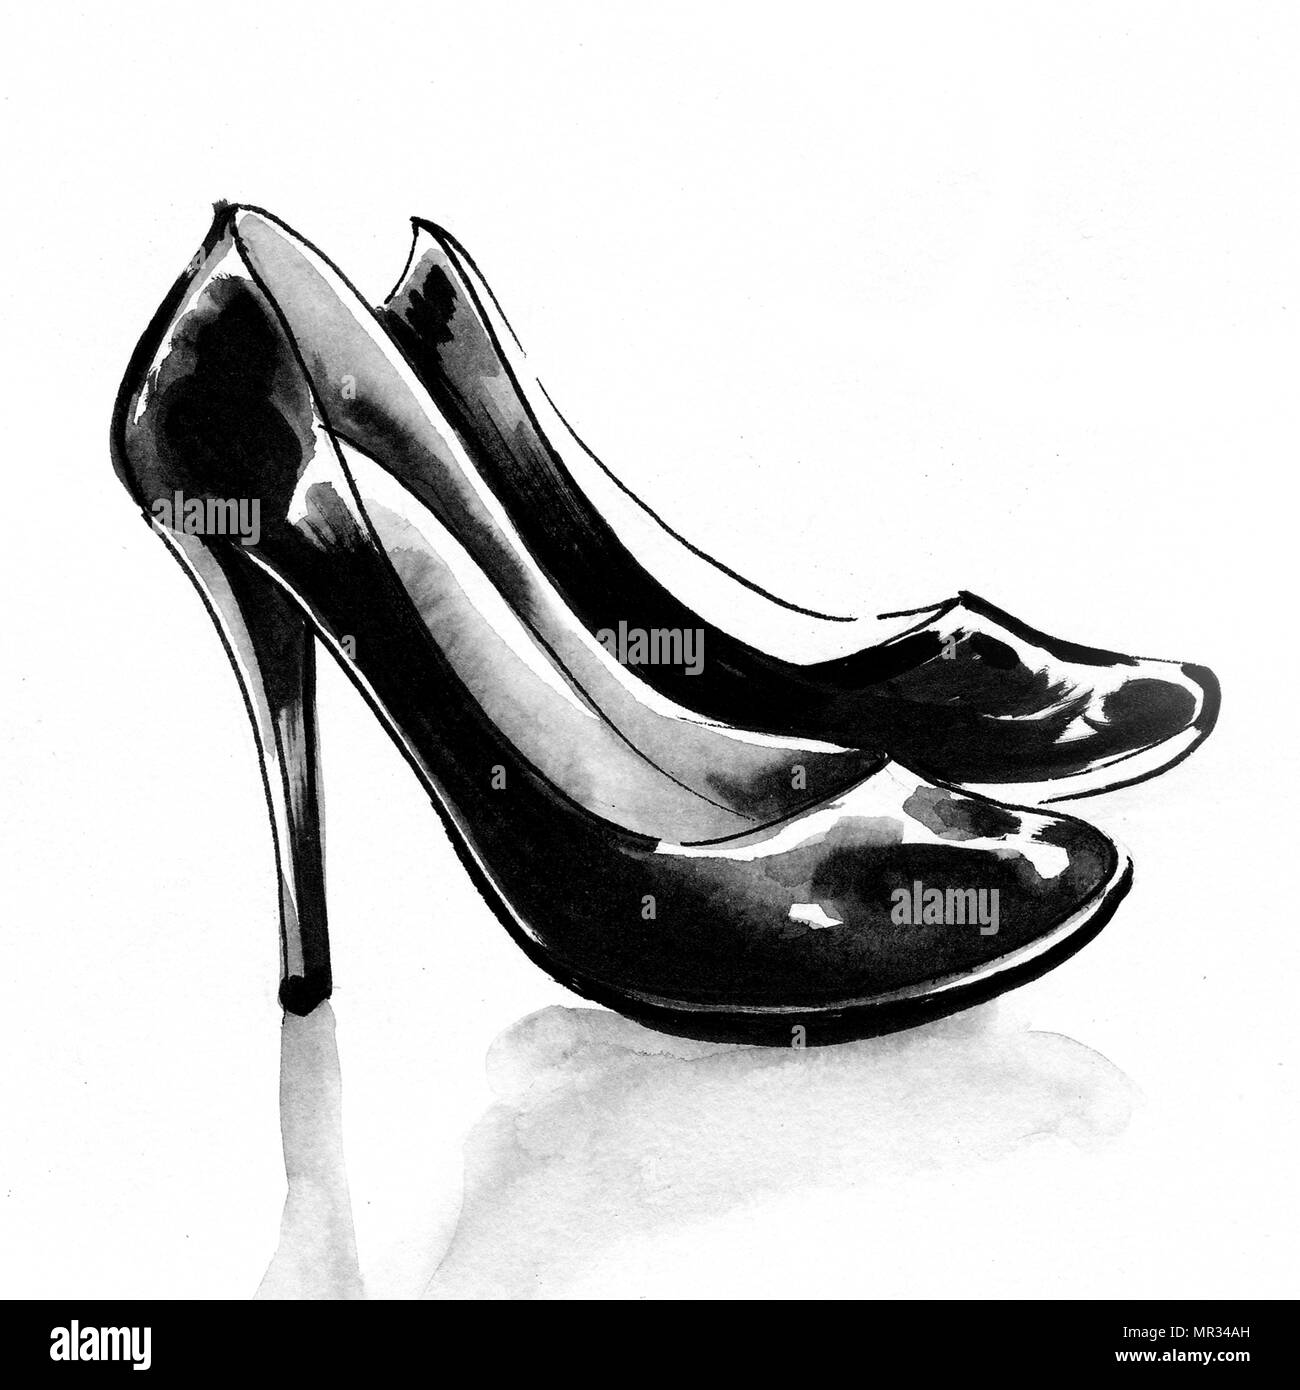 High heel shoes. Ink and watercolor illustration Stock Photo